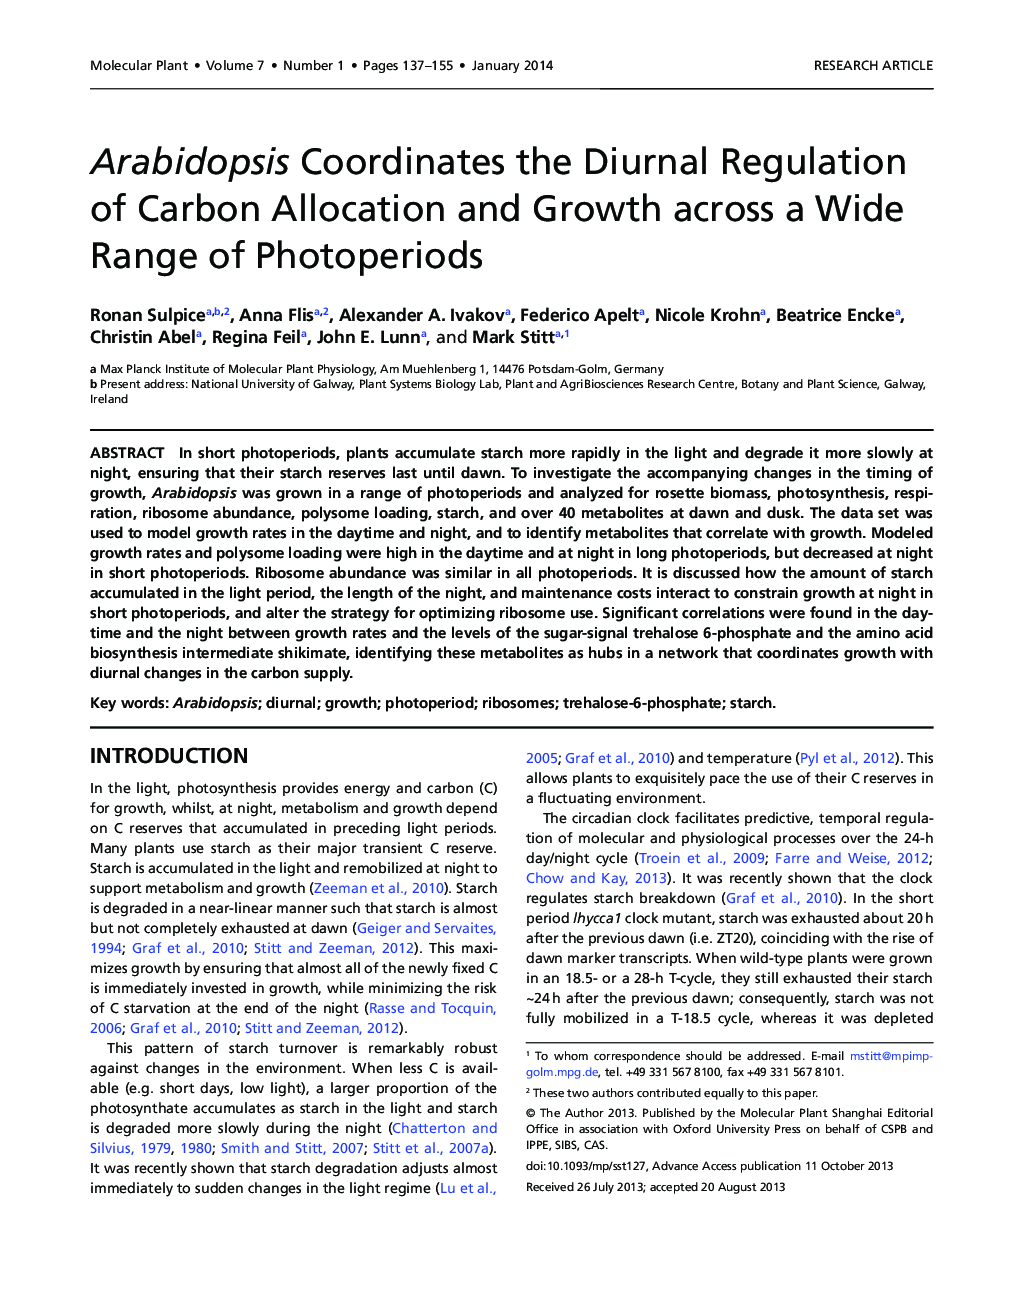 Arabidopsis Coordinates the Diurnal Regulation of Carbon Allocation and Growth across a Wide Range of Photoperiods 